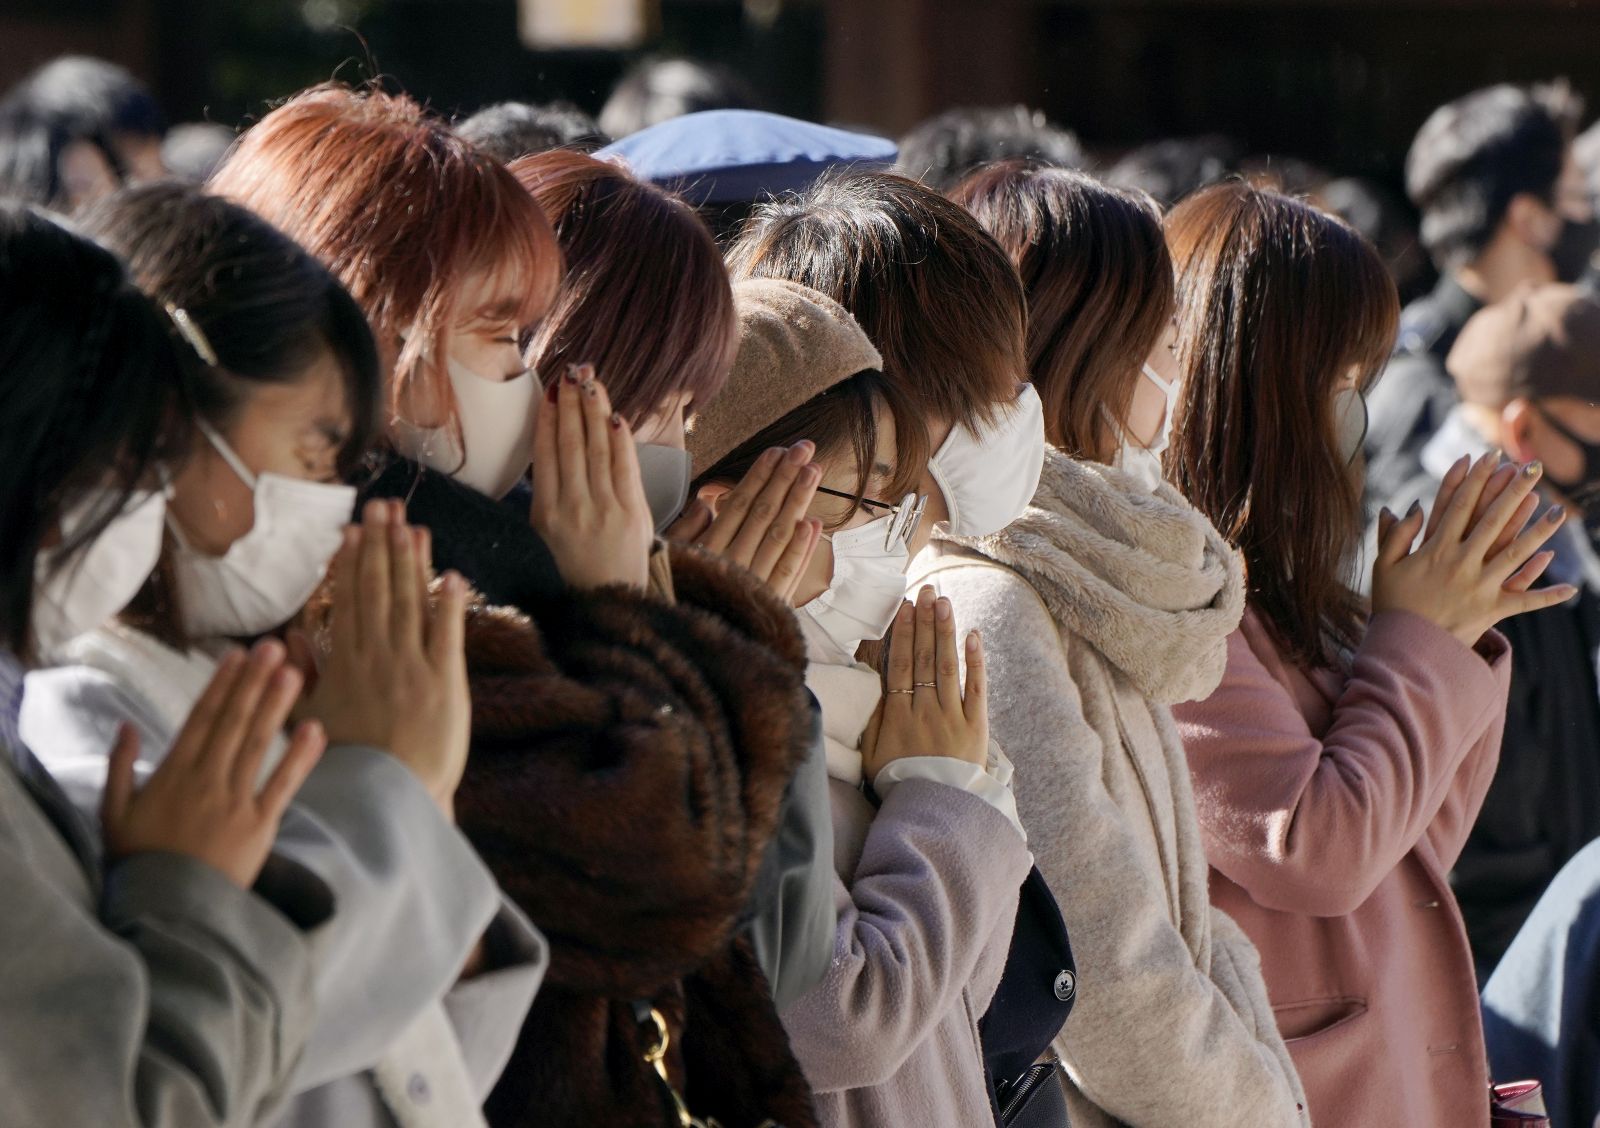 epa08913657 Visitors pray for their health, property and a good future during their first visit of the new year at Meiji Shrine in Tokyo, Japan, 01 January 2021. Annually, more than three million people visit Meiji Shrine during the first three days of the New Year.  EPA/KIMIMASA MAYAMA